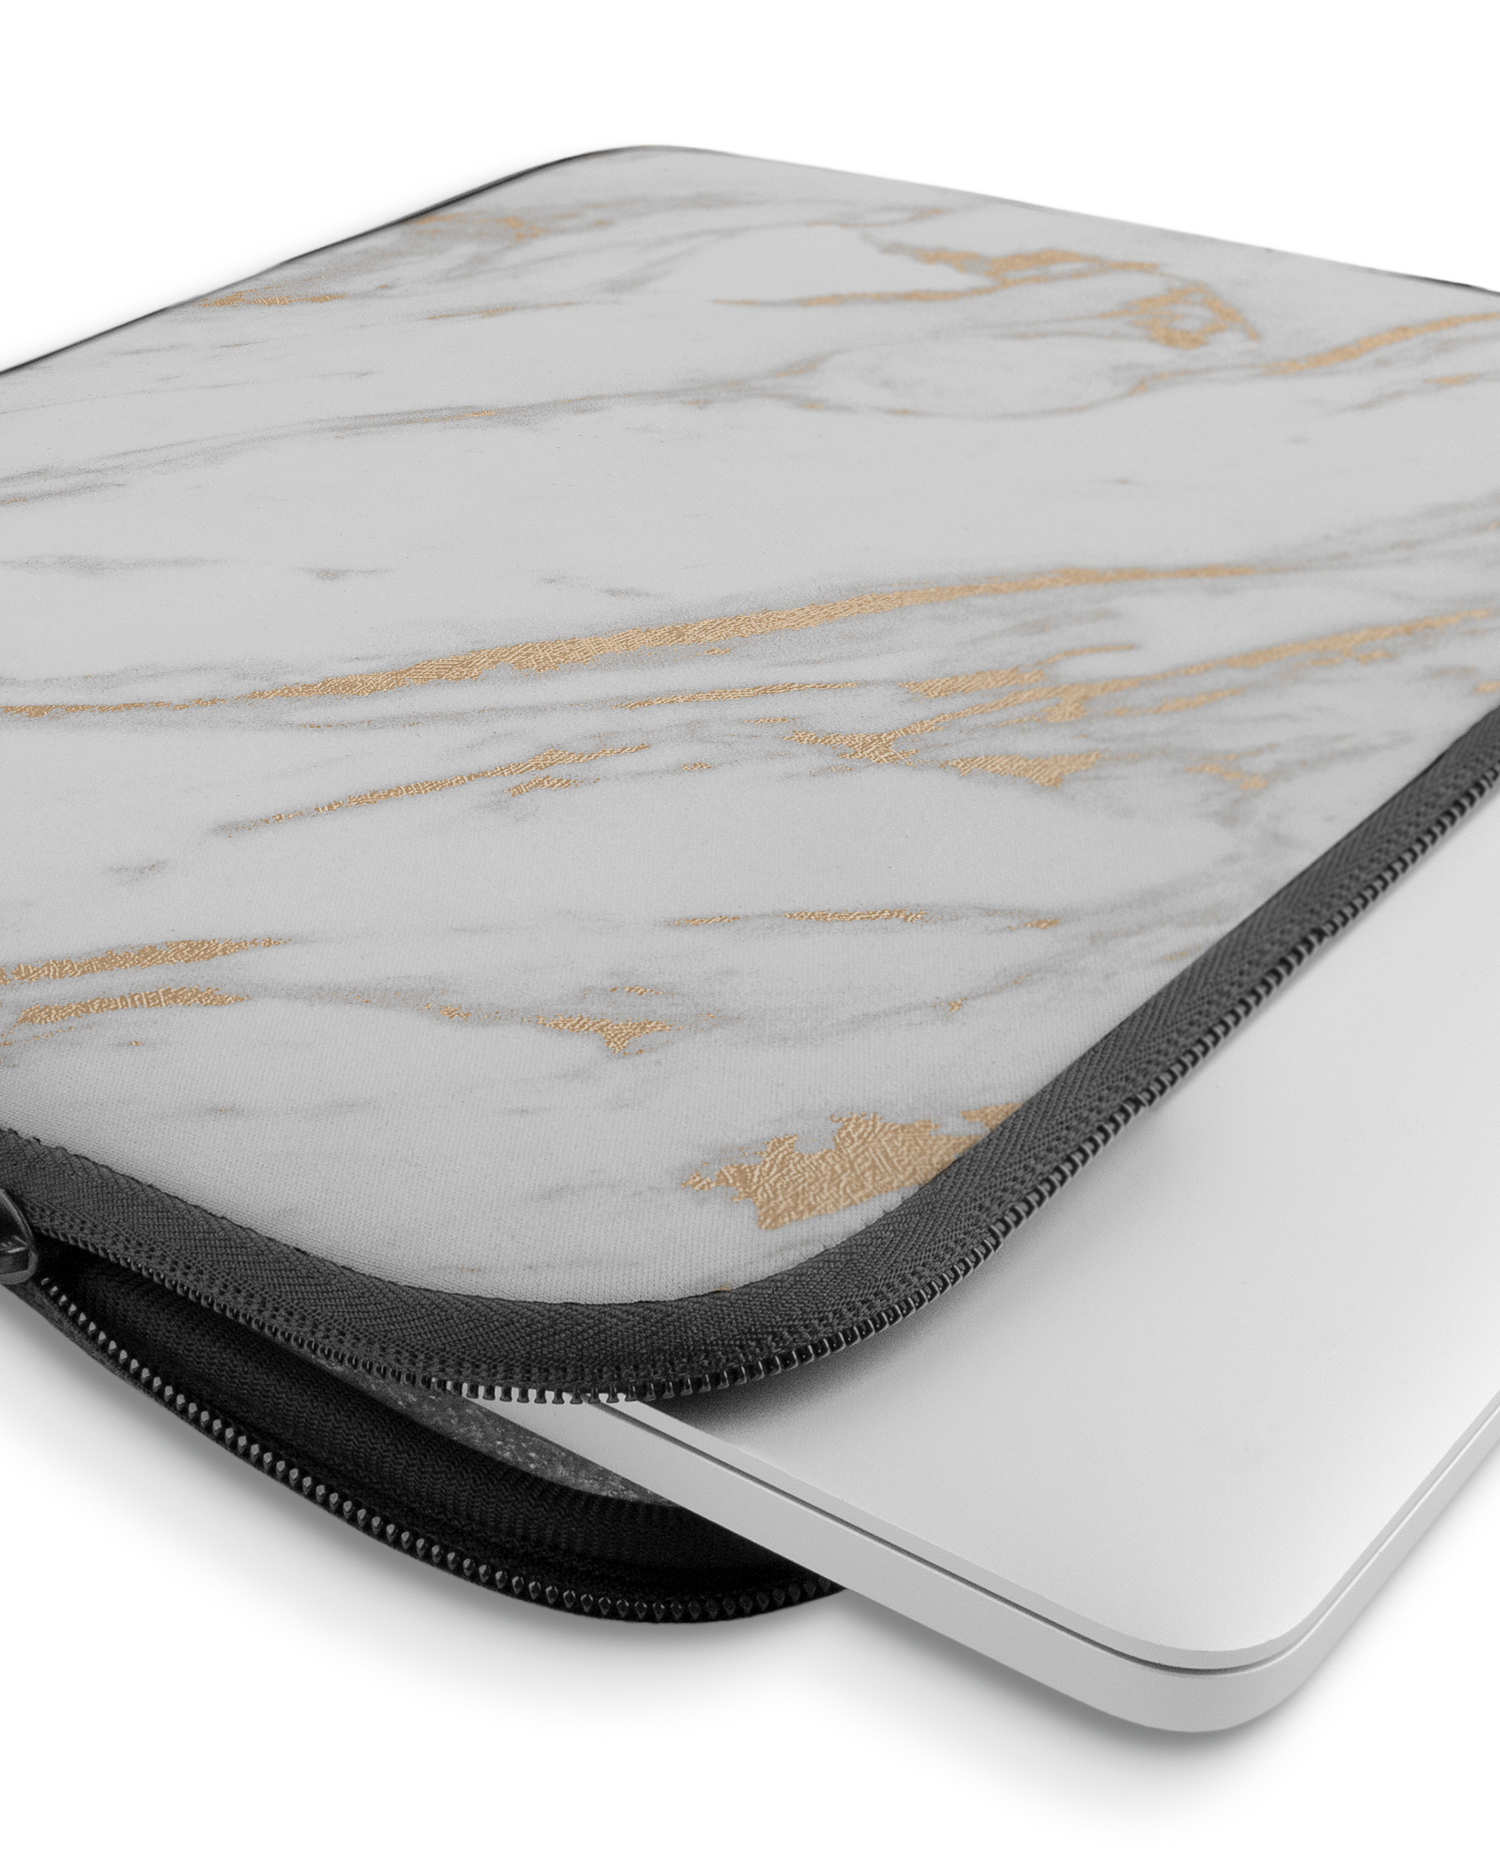 Gold Marble Elegance Laptop Case 15 inch with device inside